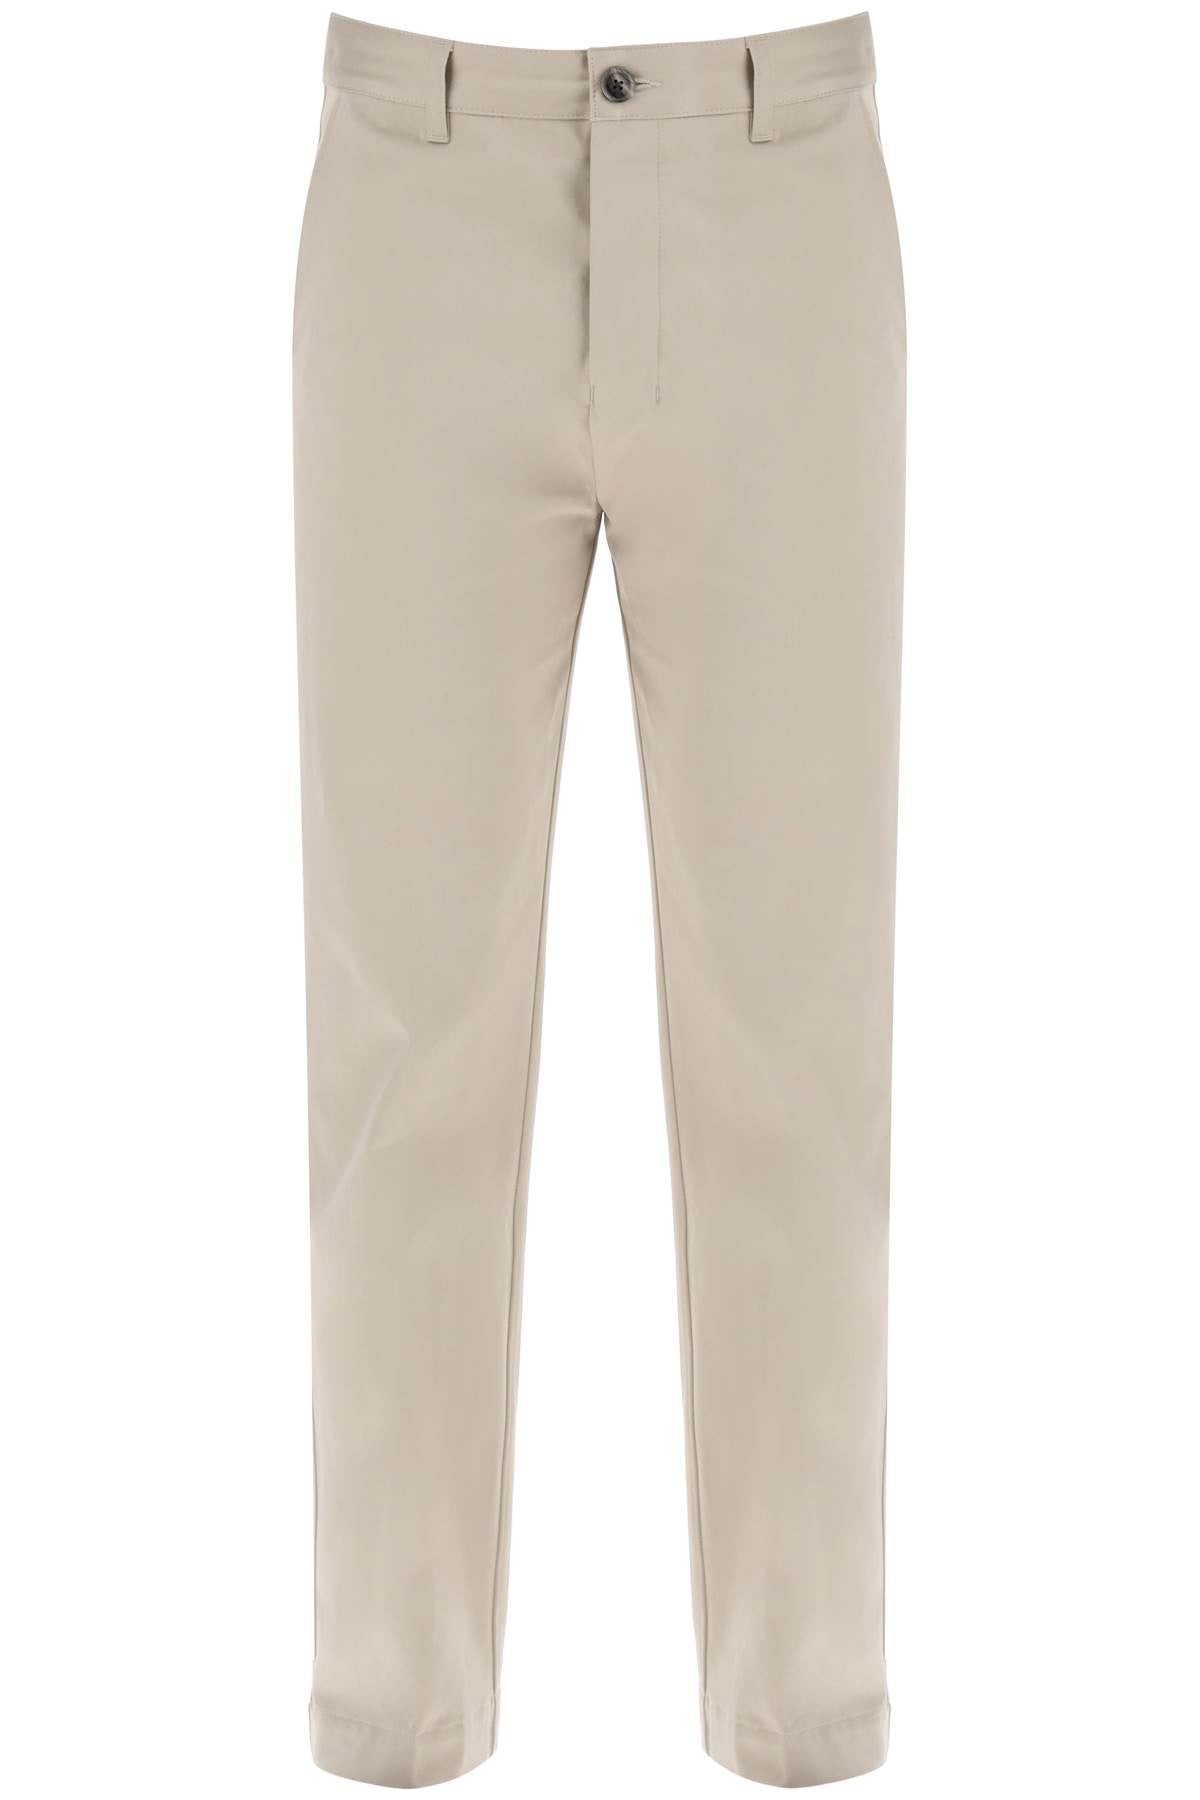 cotton satin chino pants in-0